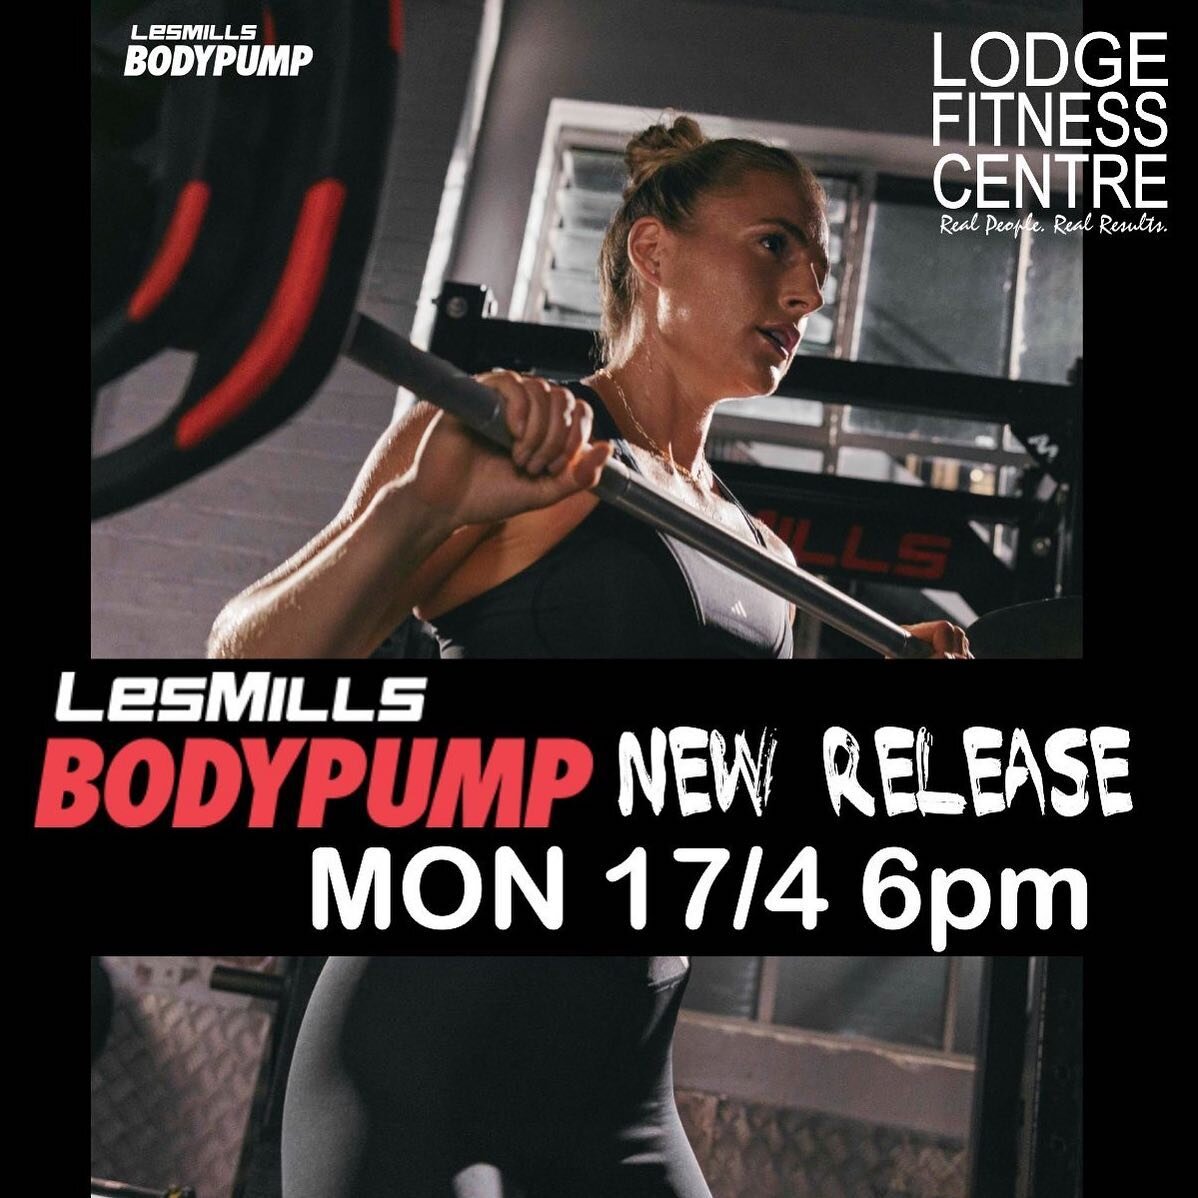 Max Reps! Check out the new BODYPUMP Monday night! Bookings open now on the app #livelodgefit